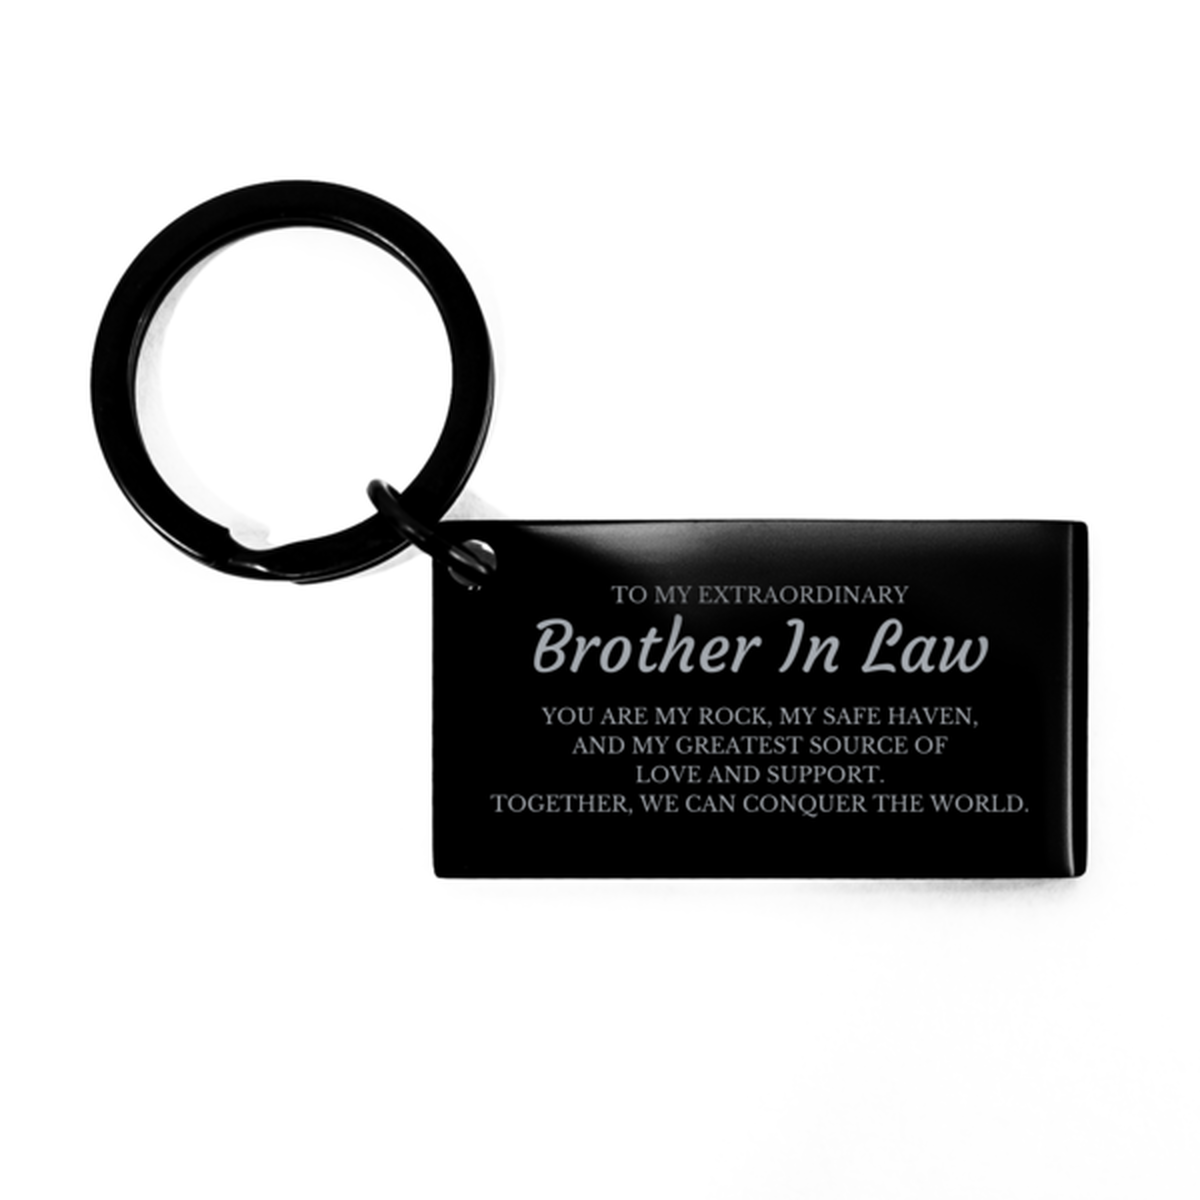 To My Extraordinary Brother In Law Gifts, Together, we can conquer the world, Birthday Keychain For Brother In Law, Christmas Gifts For Brother In Law